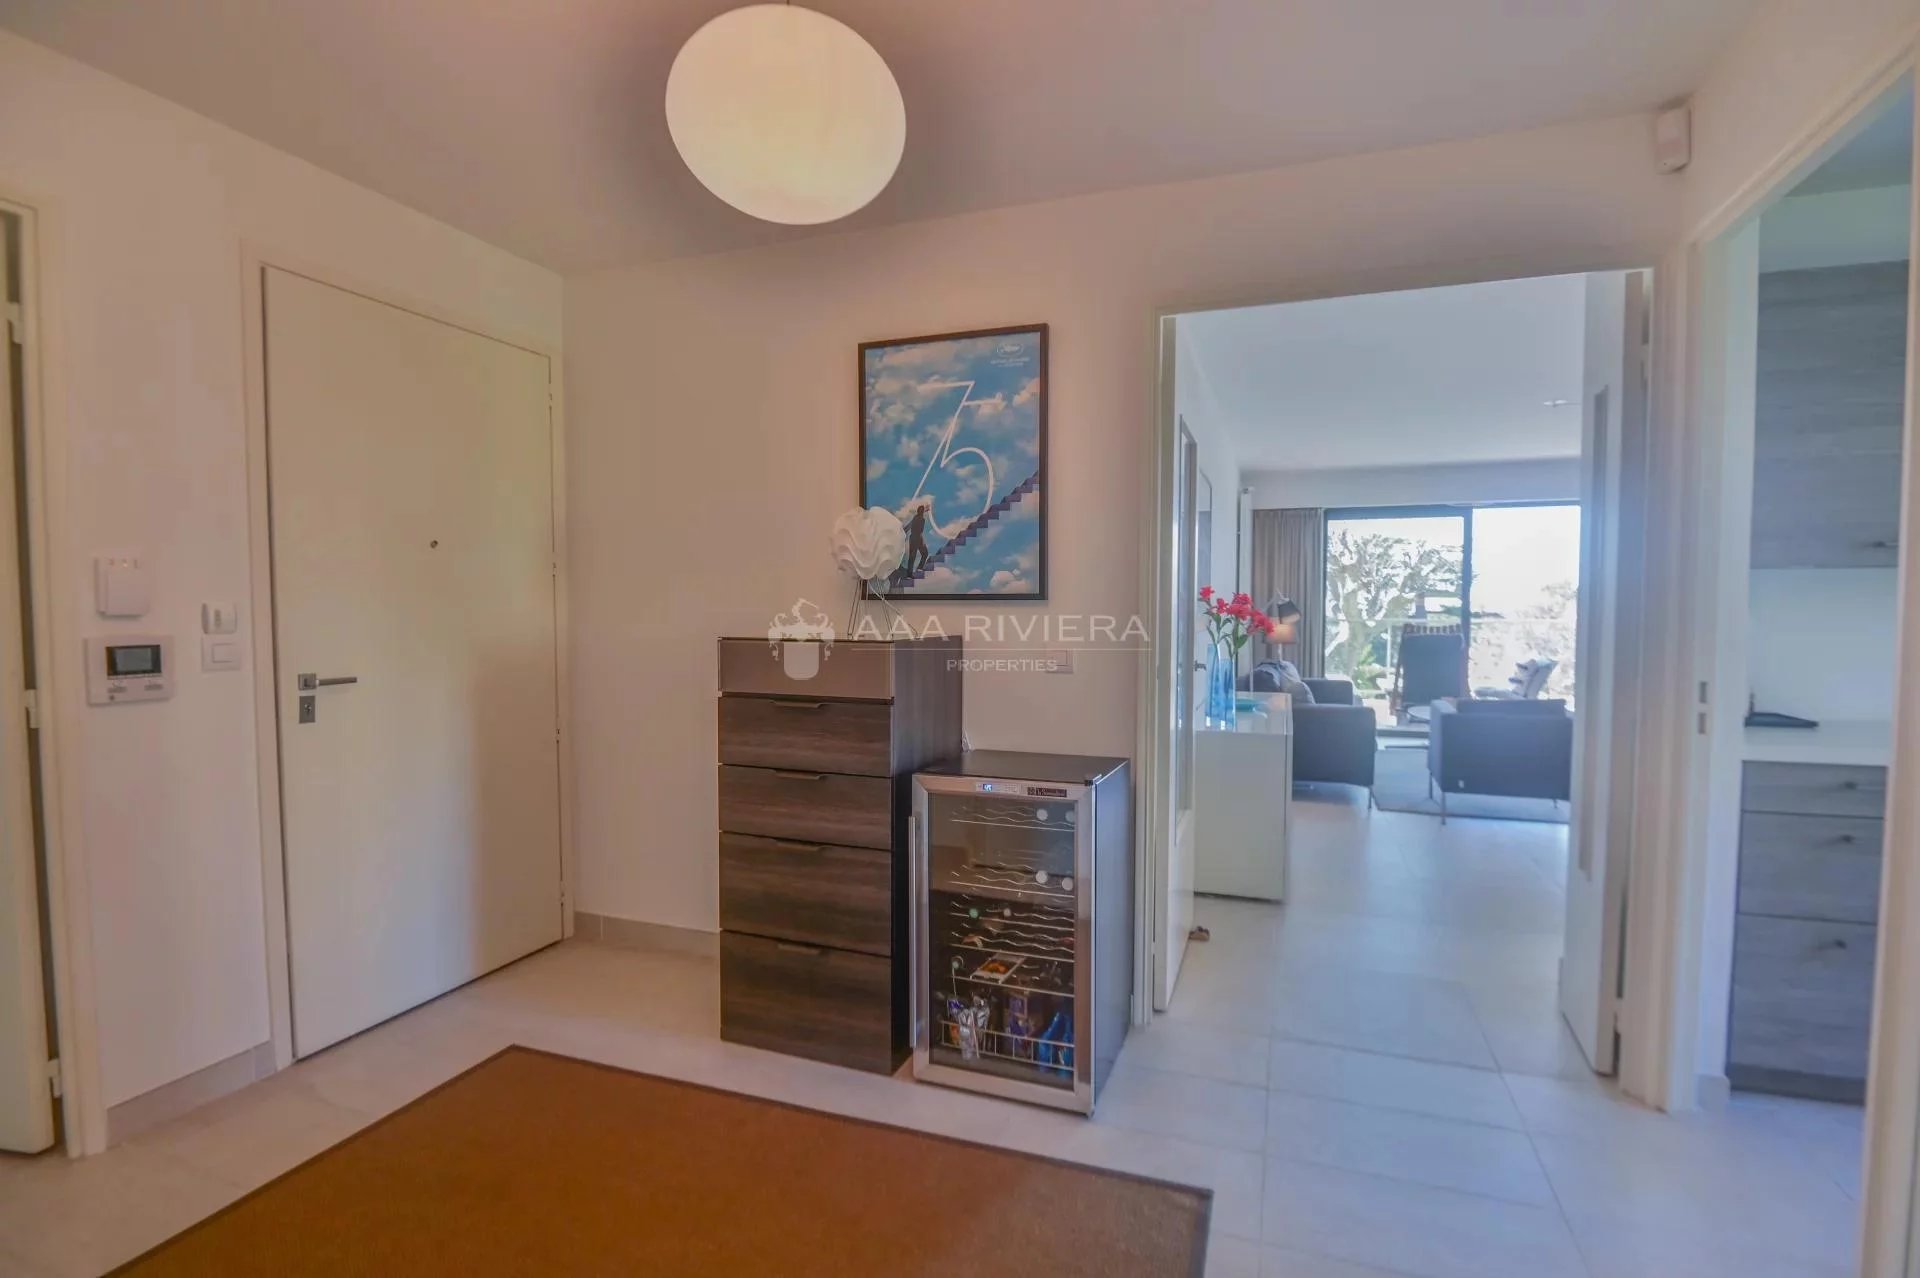 SOLE AGENT - Wonderful 3 bedroom apartment in recent building. Pool, Double garage